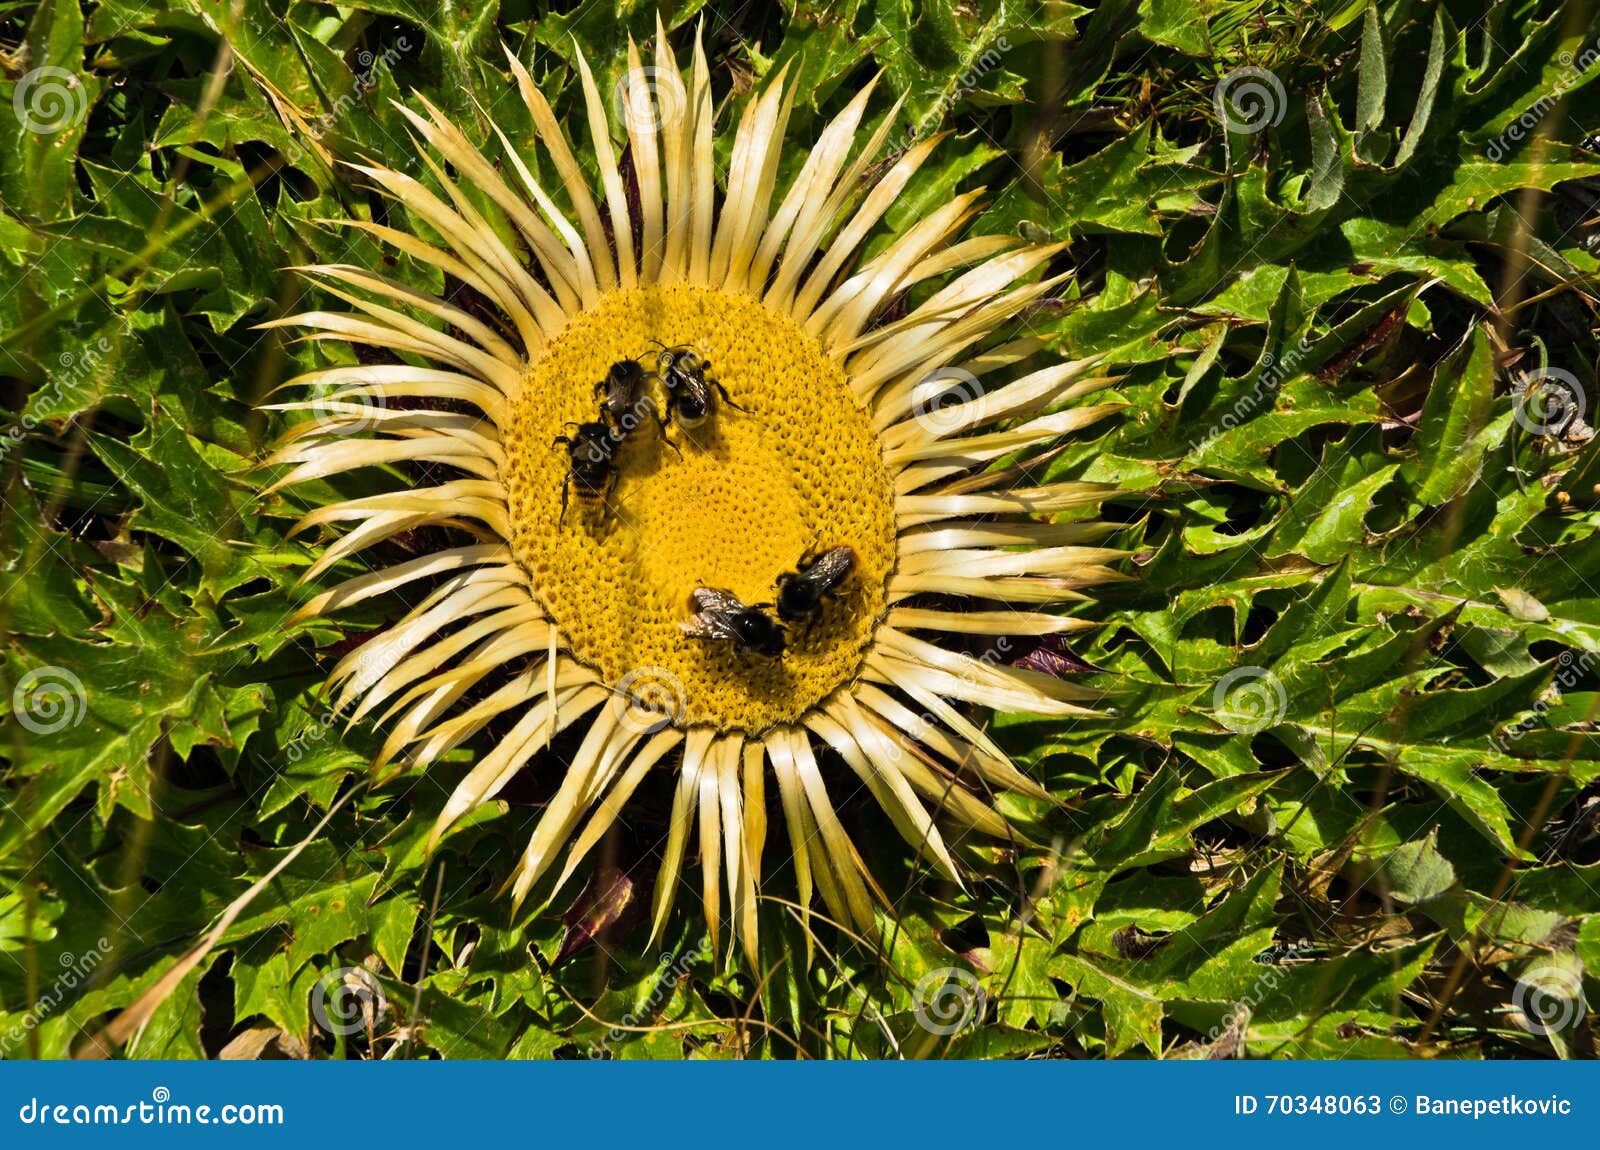 bees on wild yellow flower collecting polen